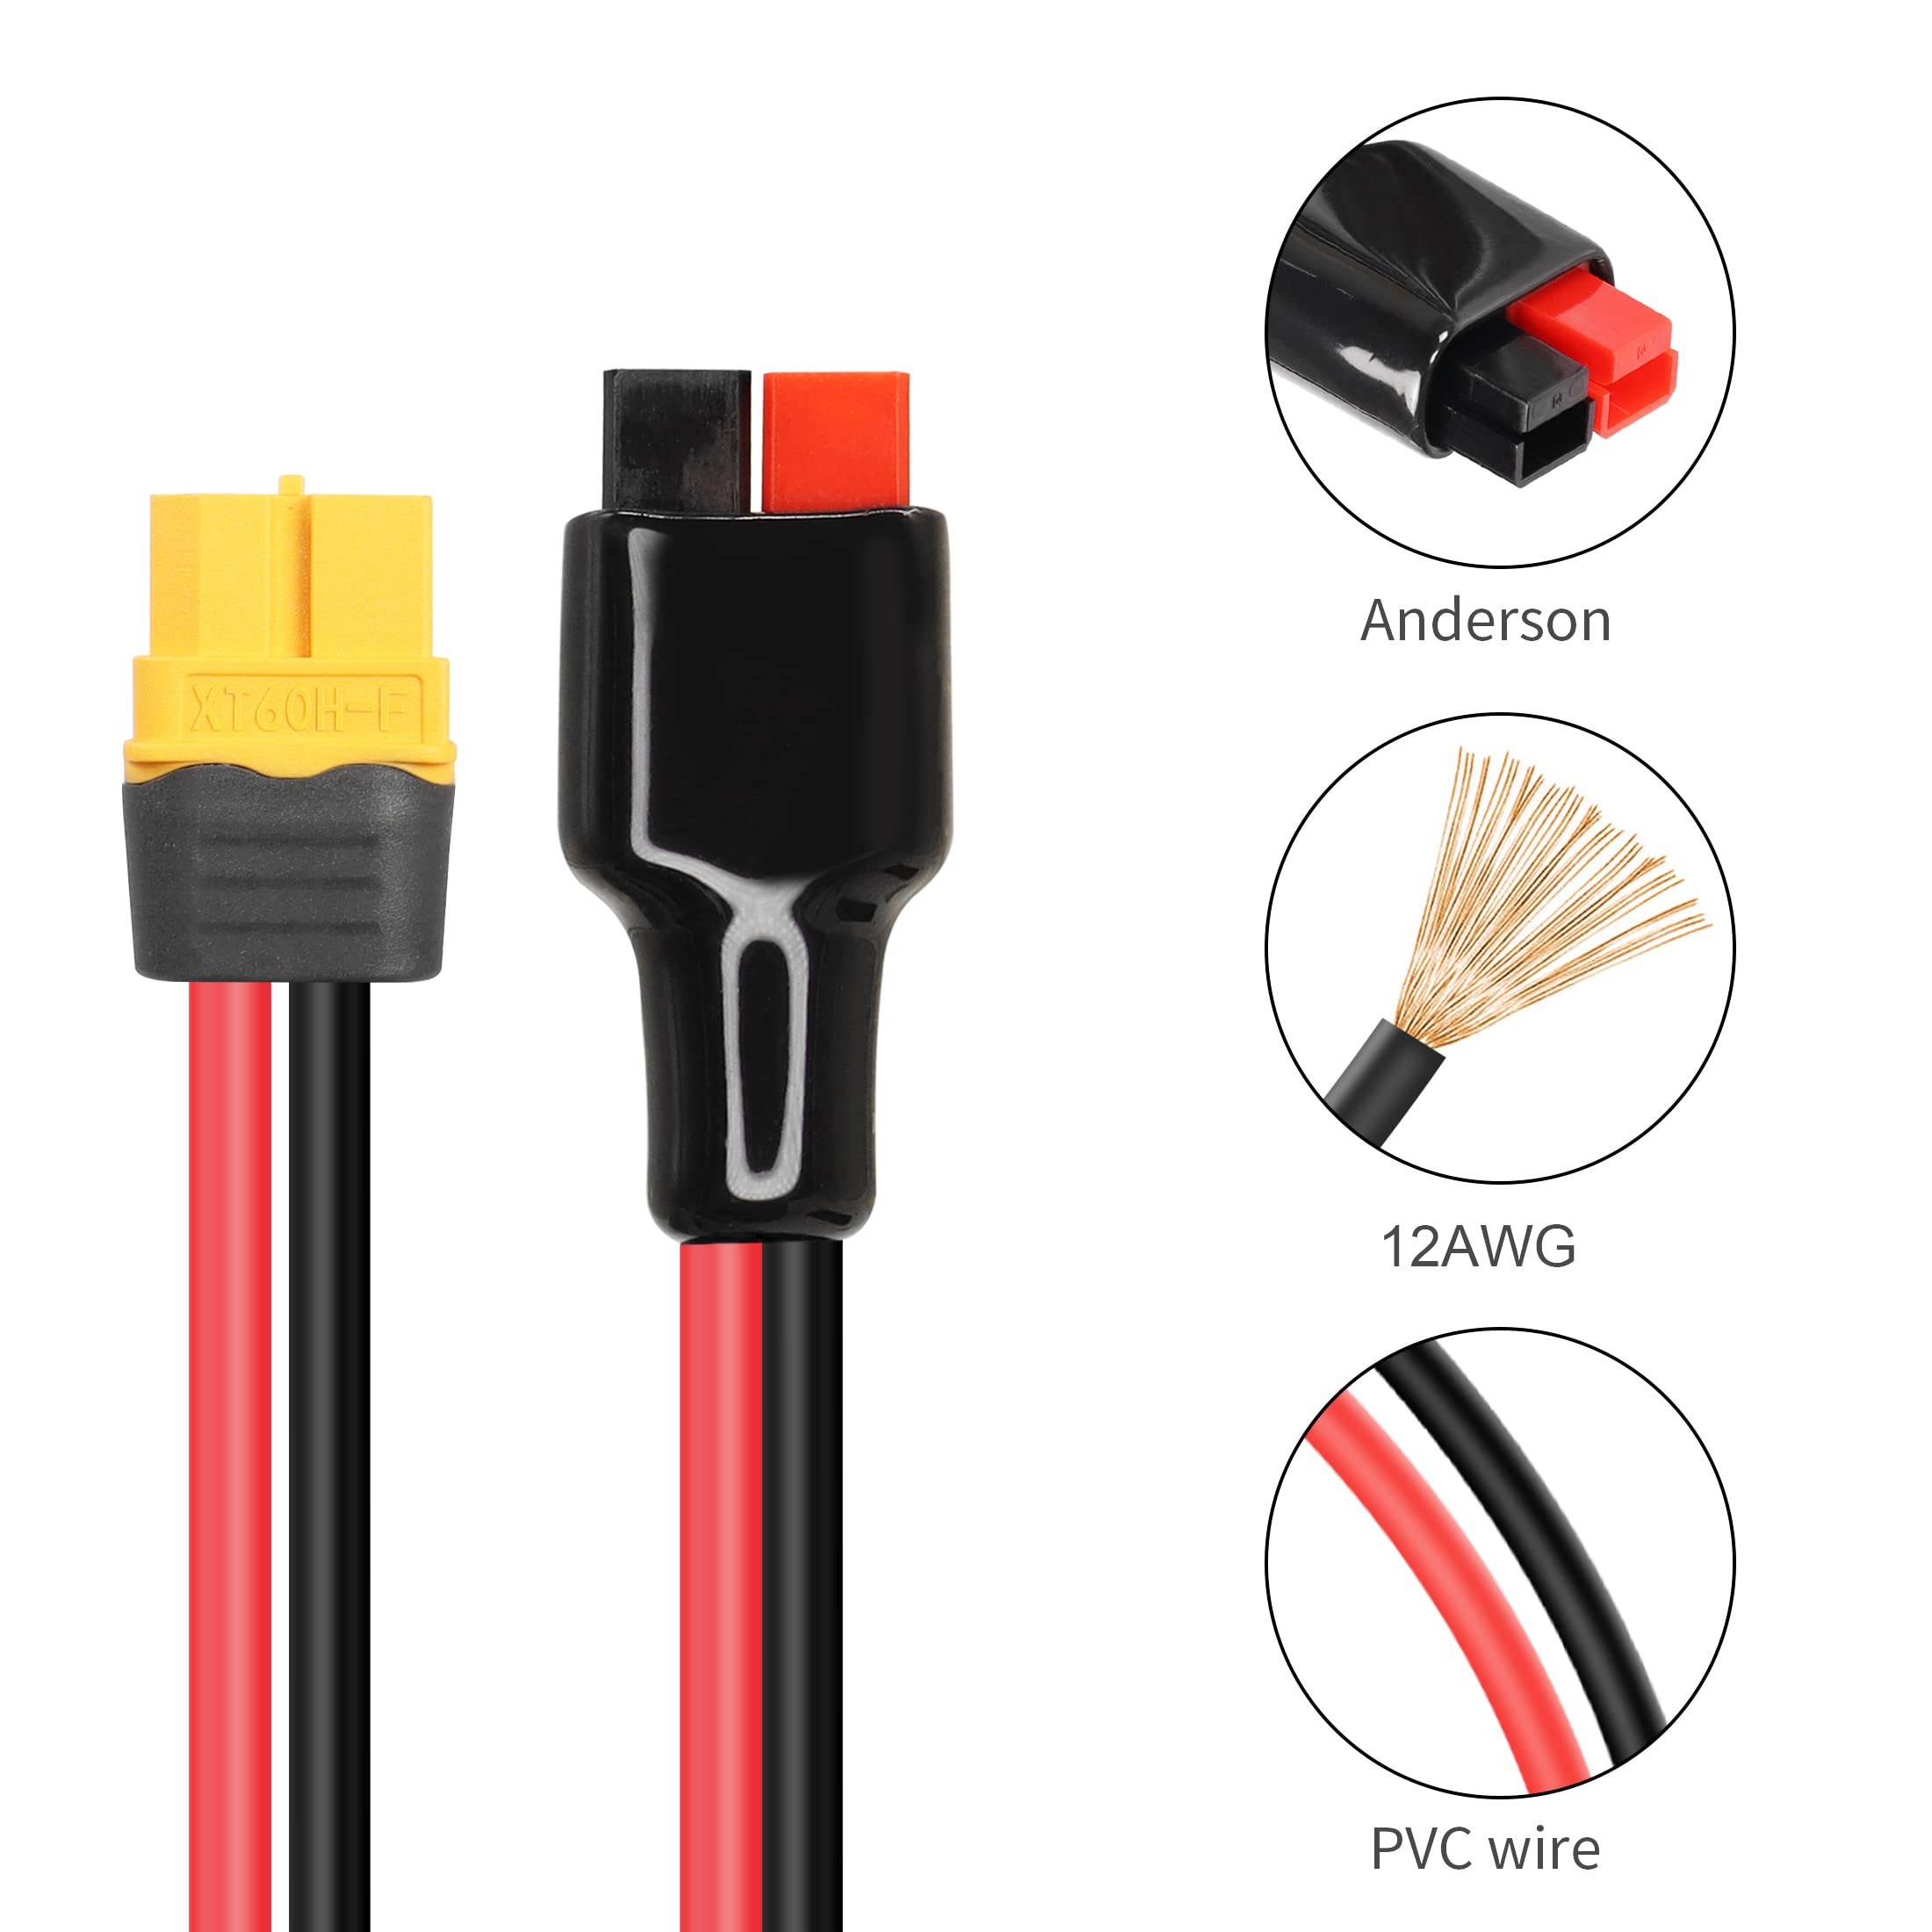 YACSEJAO 12AWG XT60 to Solar Panel Connector 1M XT60 Female to 45A Connector Extension Cable for Outdoor Power Bank RC Lipo Battery Lithium Battery